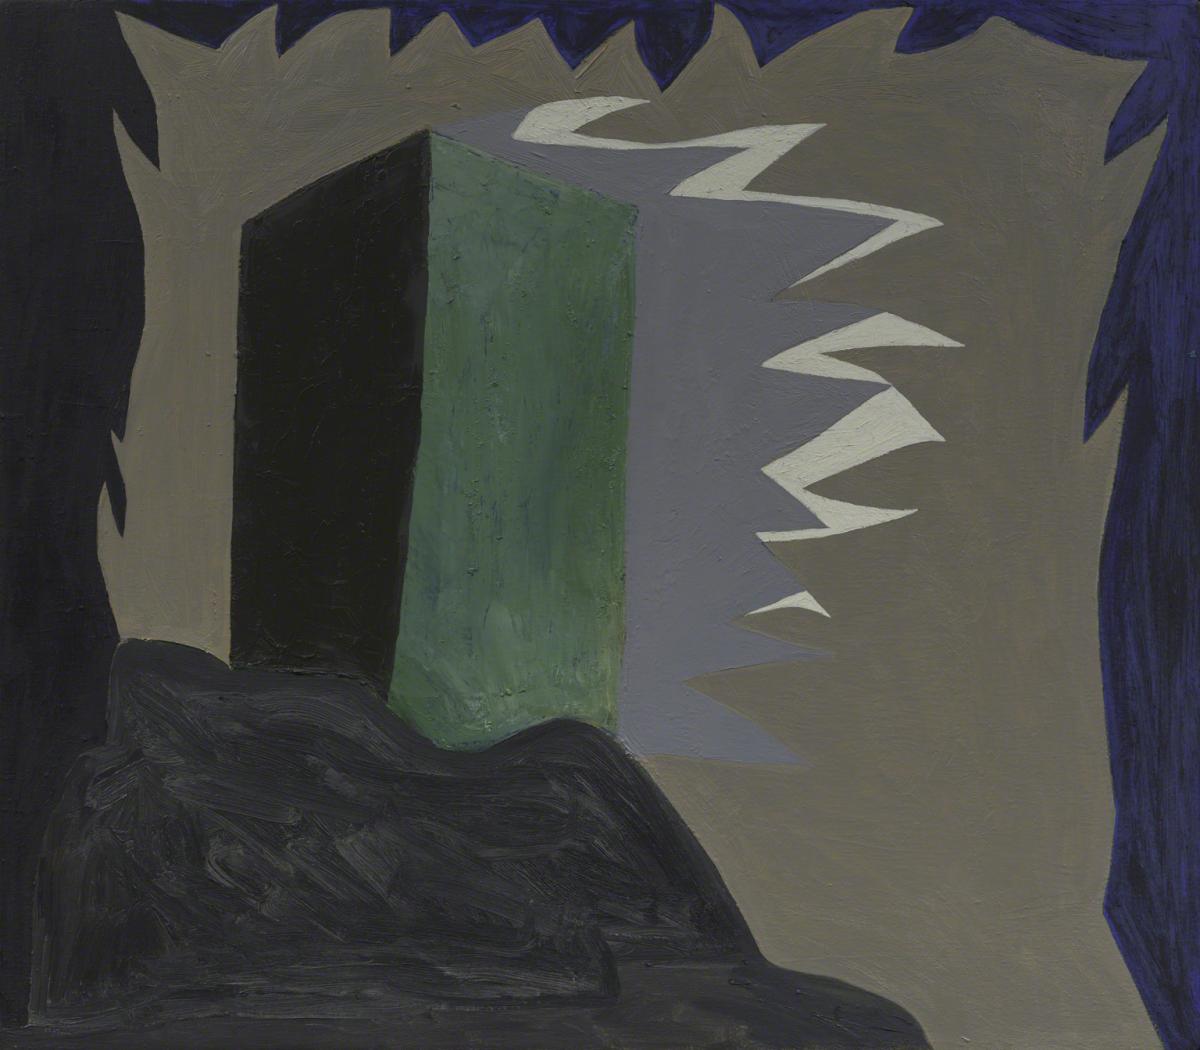 Painting of a rectangular green building with white and grey flames